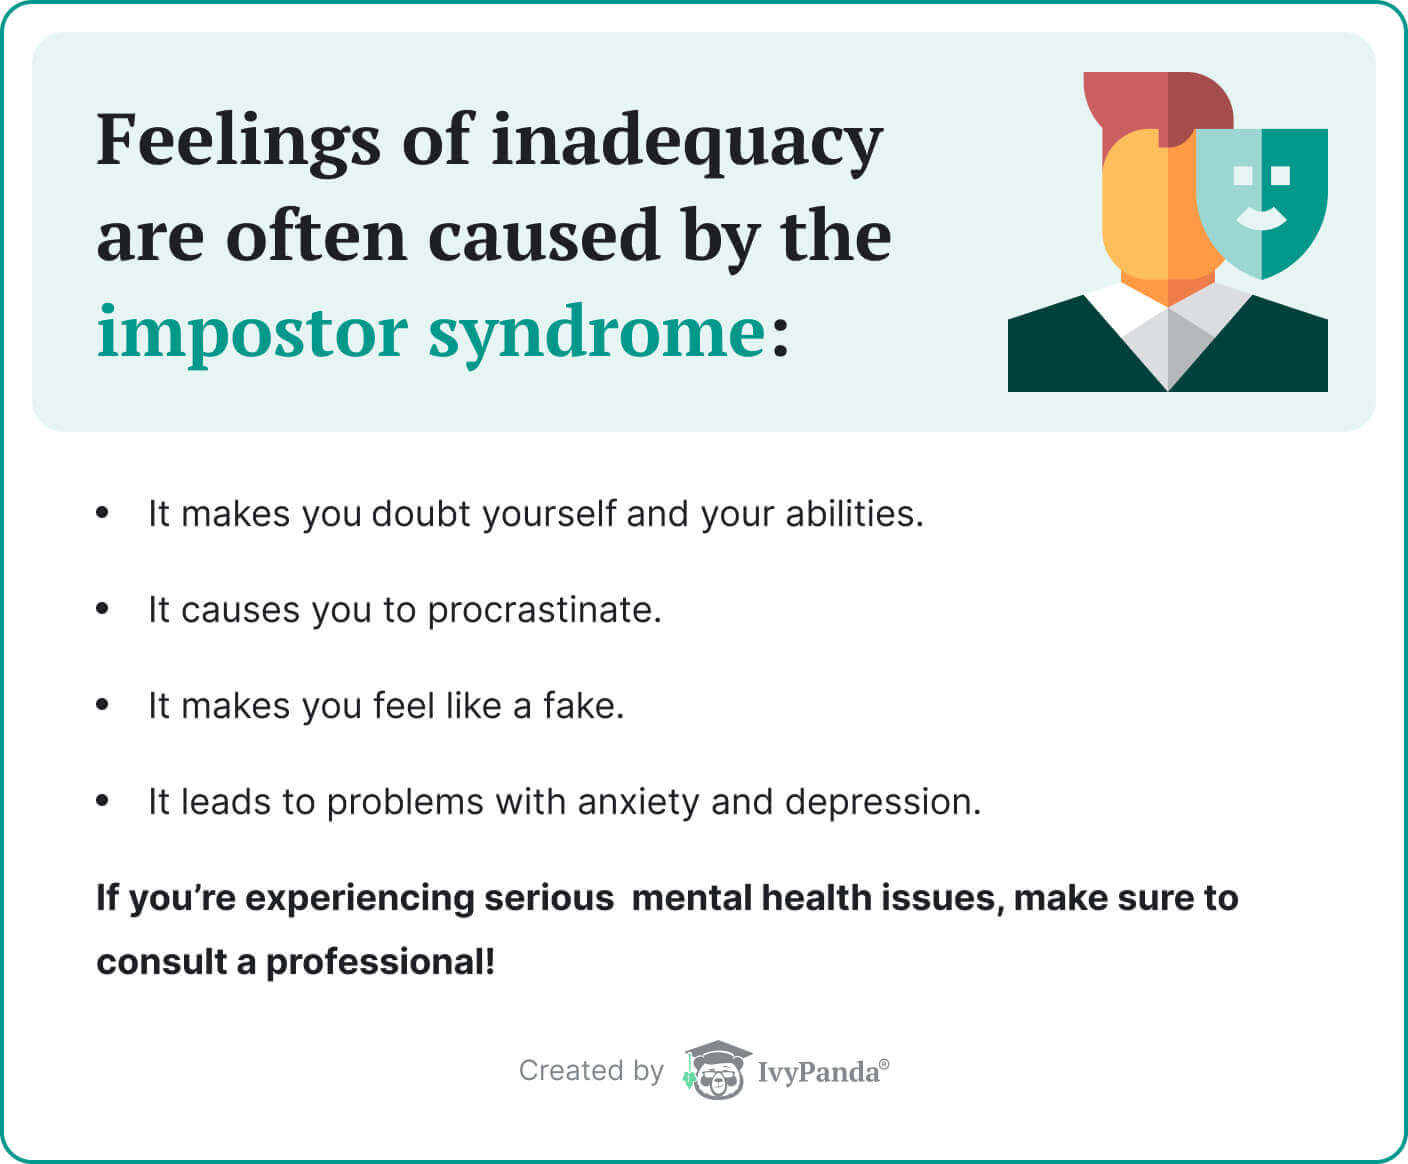 The picture enumerates the symptoms of the impostor syndrome.